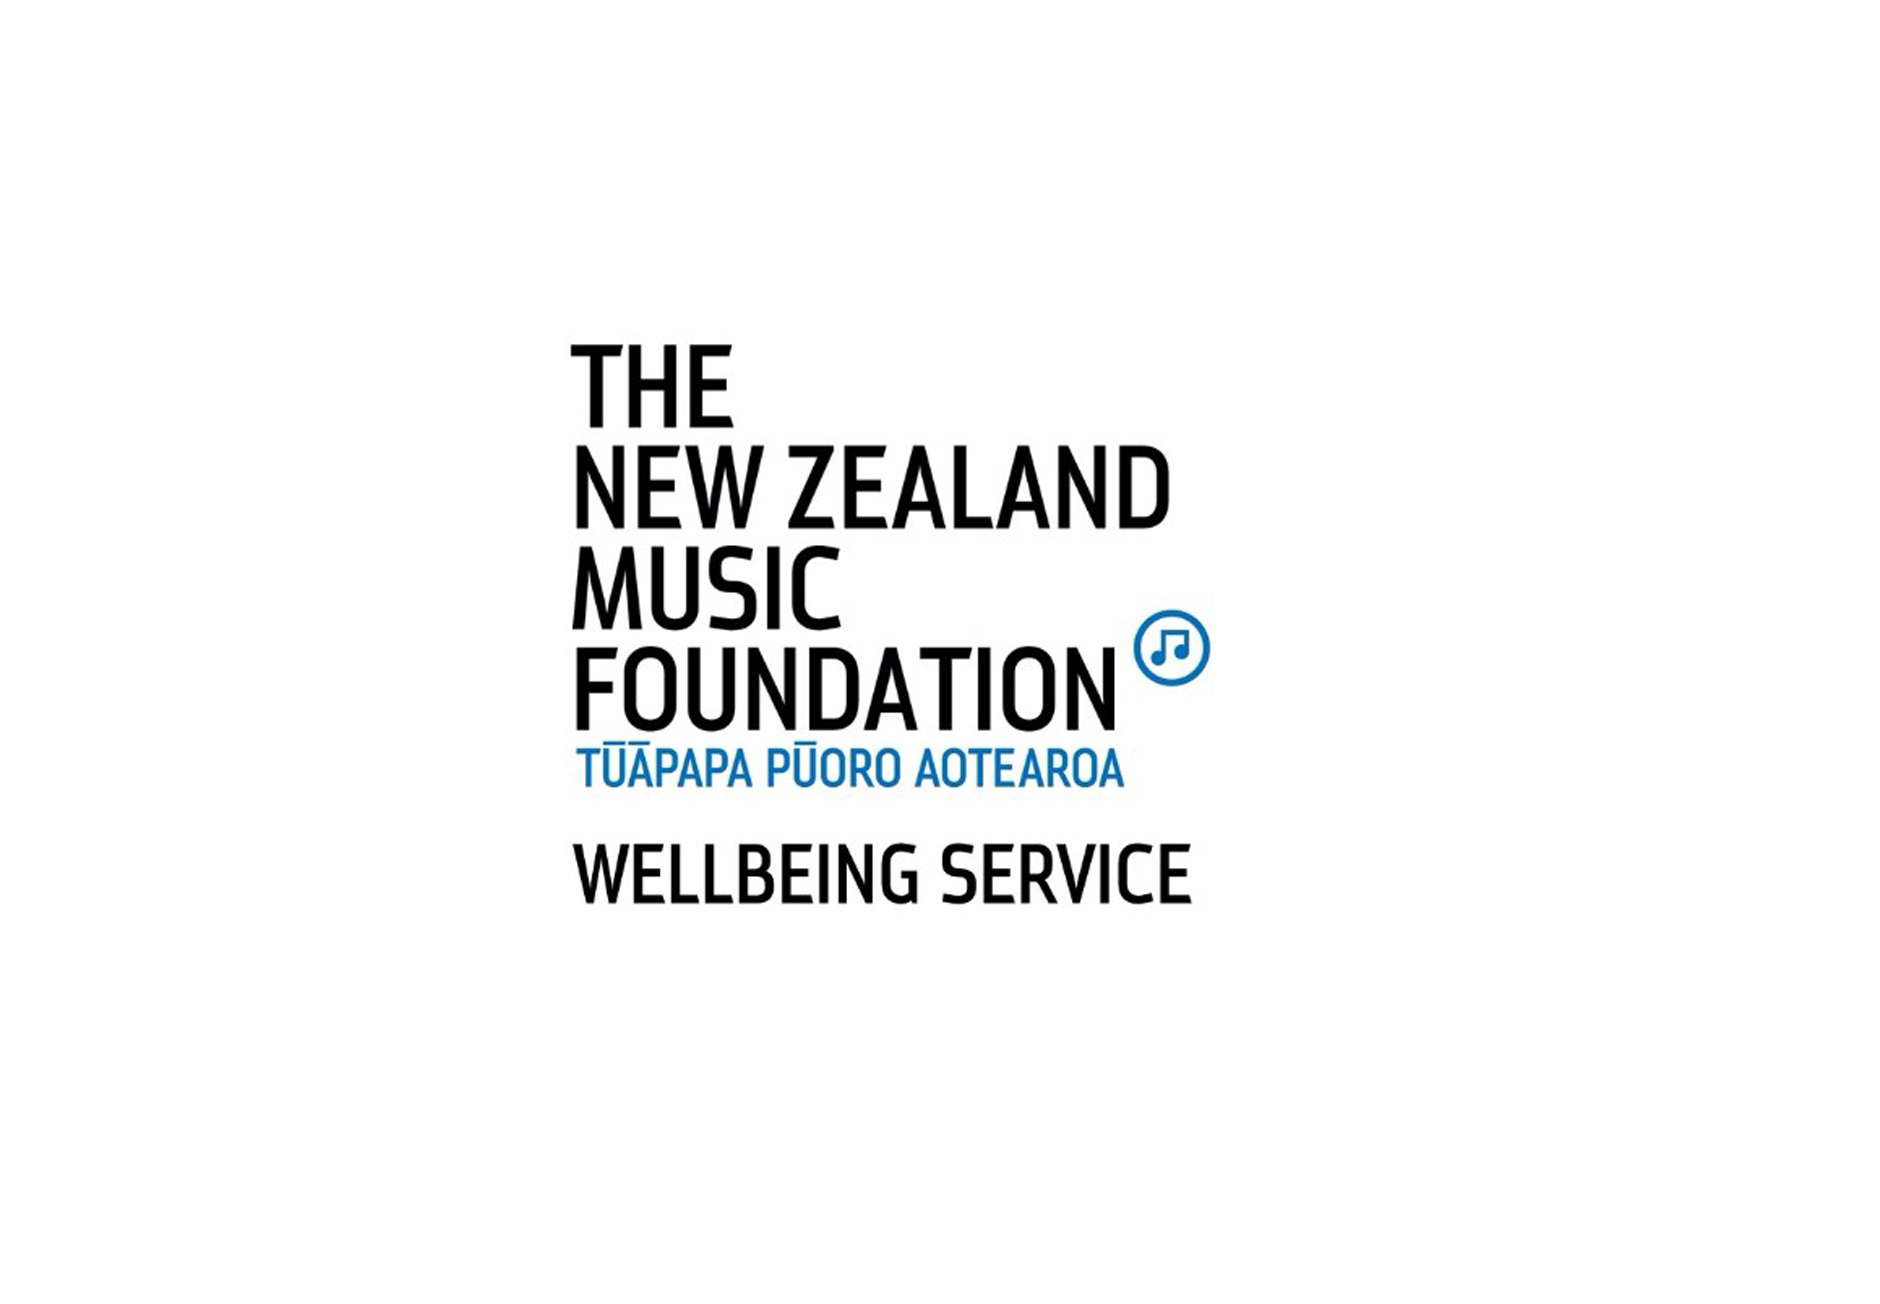 NZ Music Foundation announces wellbeing service